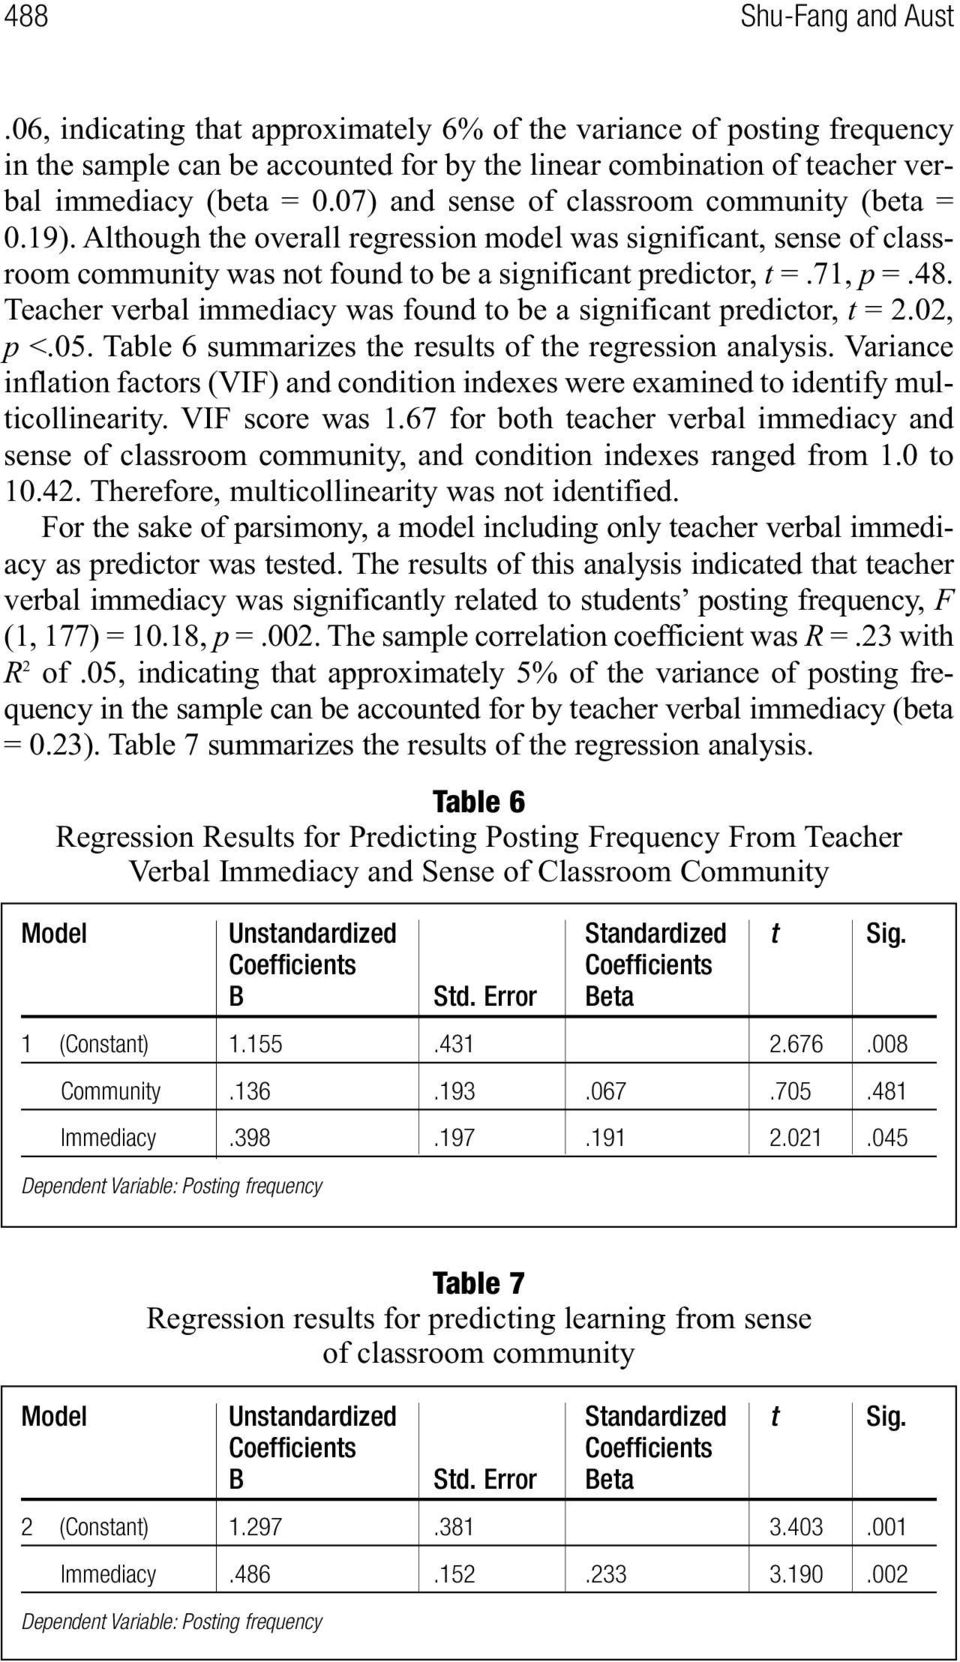 Teacher verbal immediacy was found to be a significant predictor, t = 2.02, p <.05. Table 6 summarizes the results of the regression analysis.